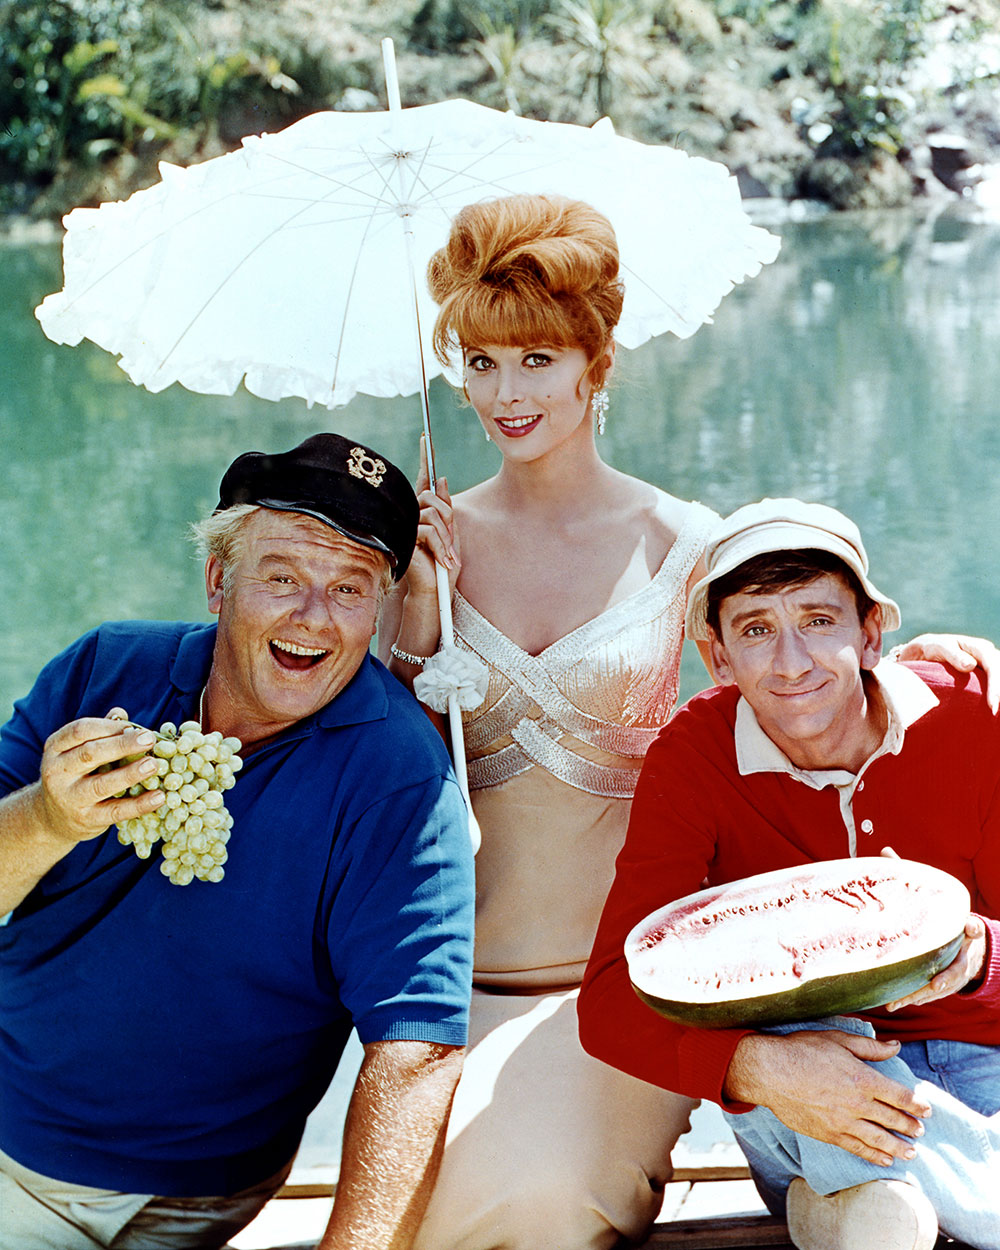 10 Things You Didn't Know About Gilligan's Island.